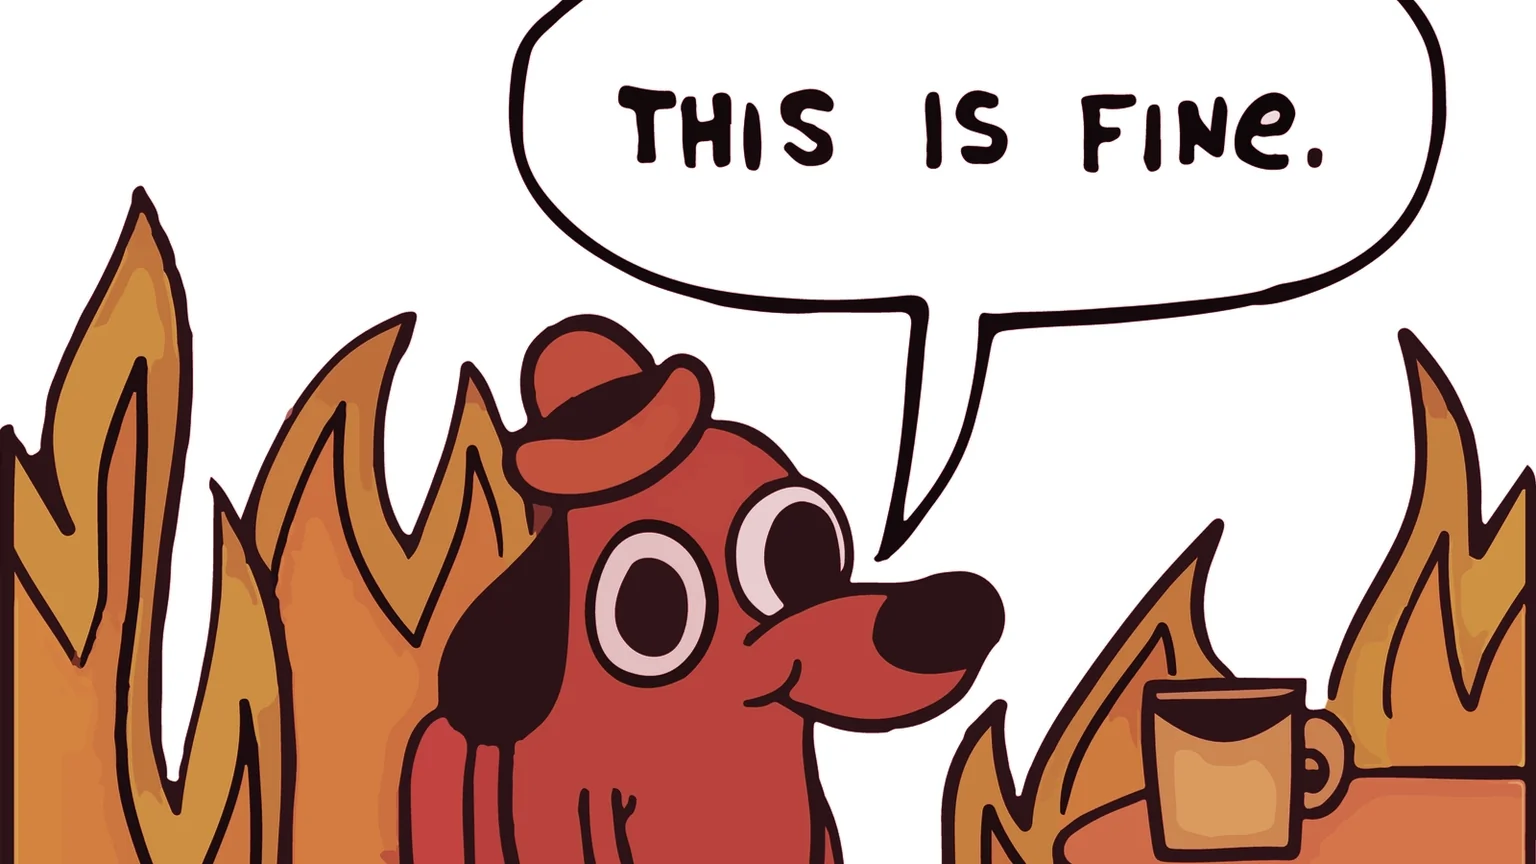 The "this is fine" meme is used to ironically say a situation is fine. Image: Shutterstock